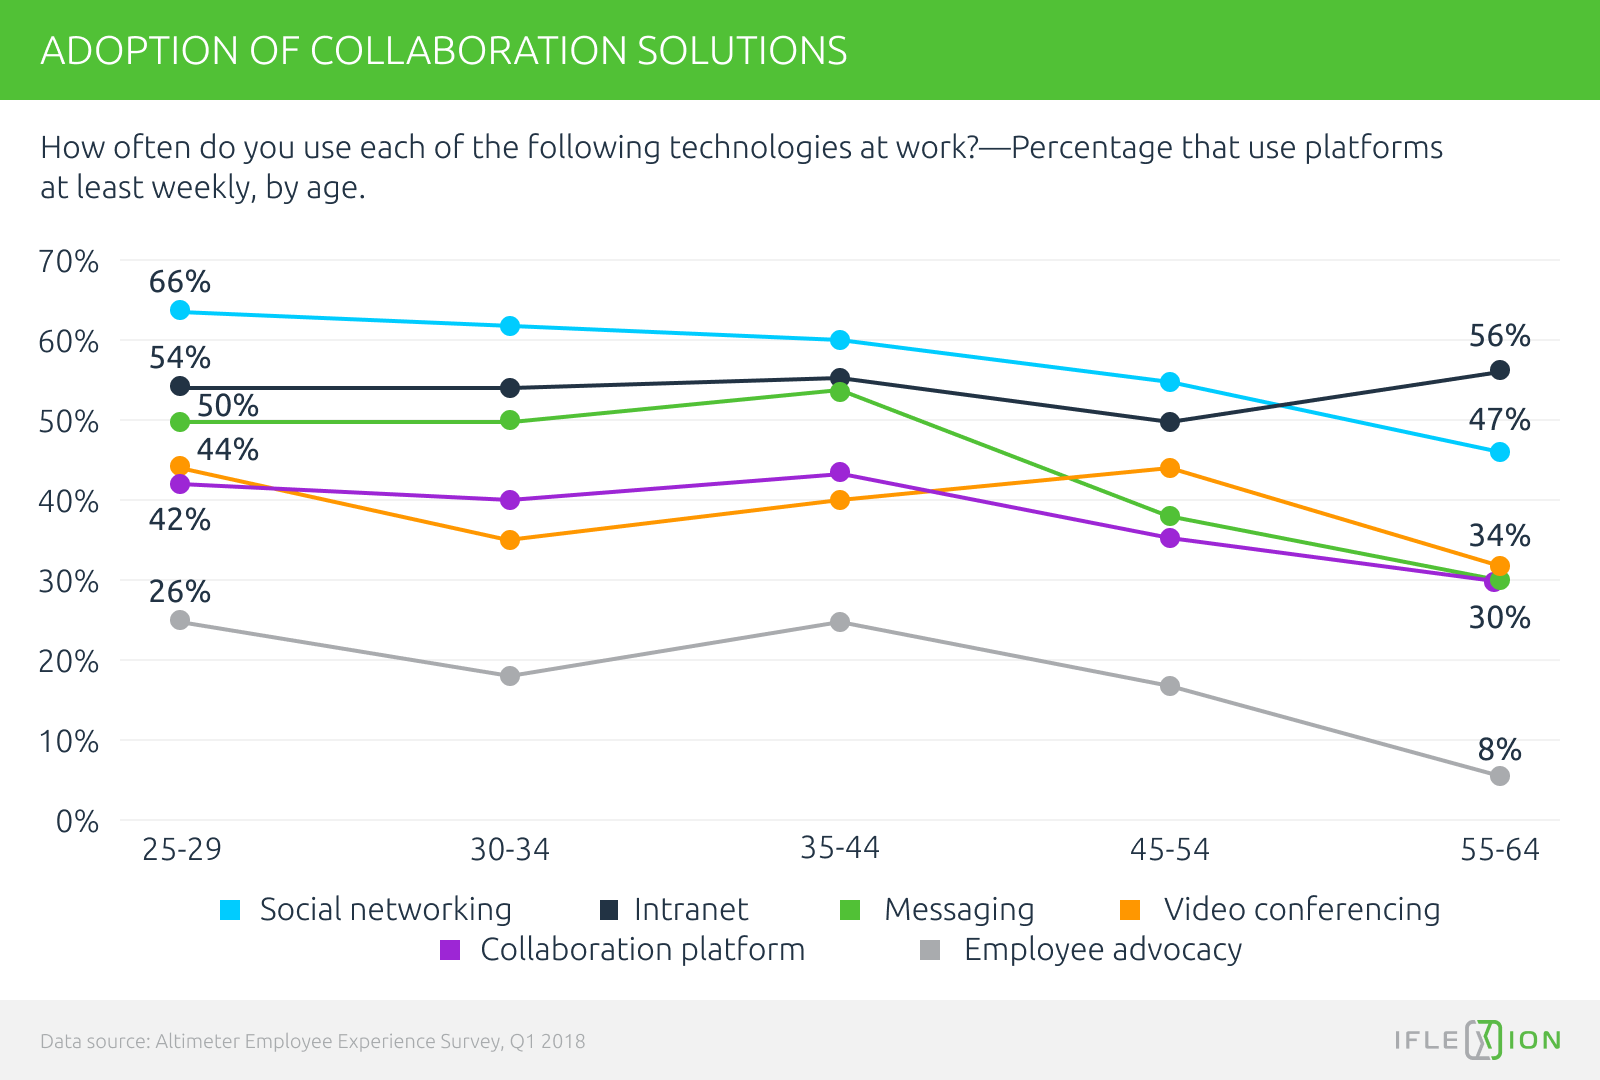 Adoption of collaboration solutions